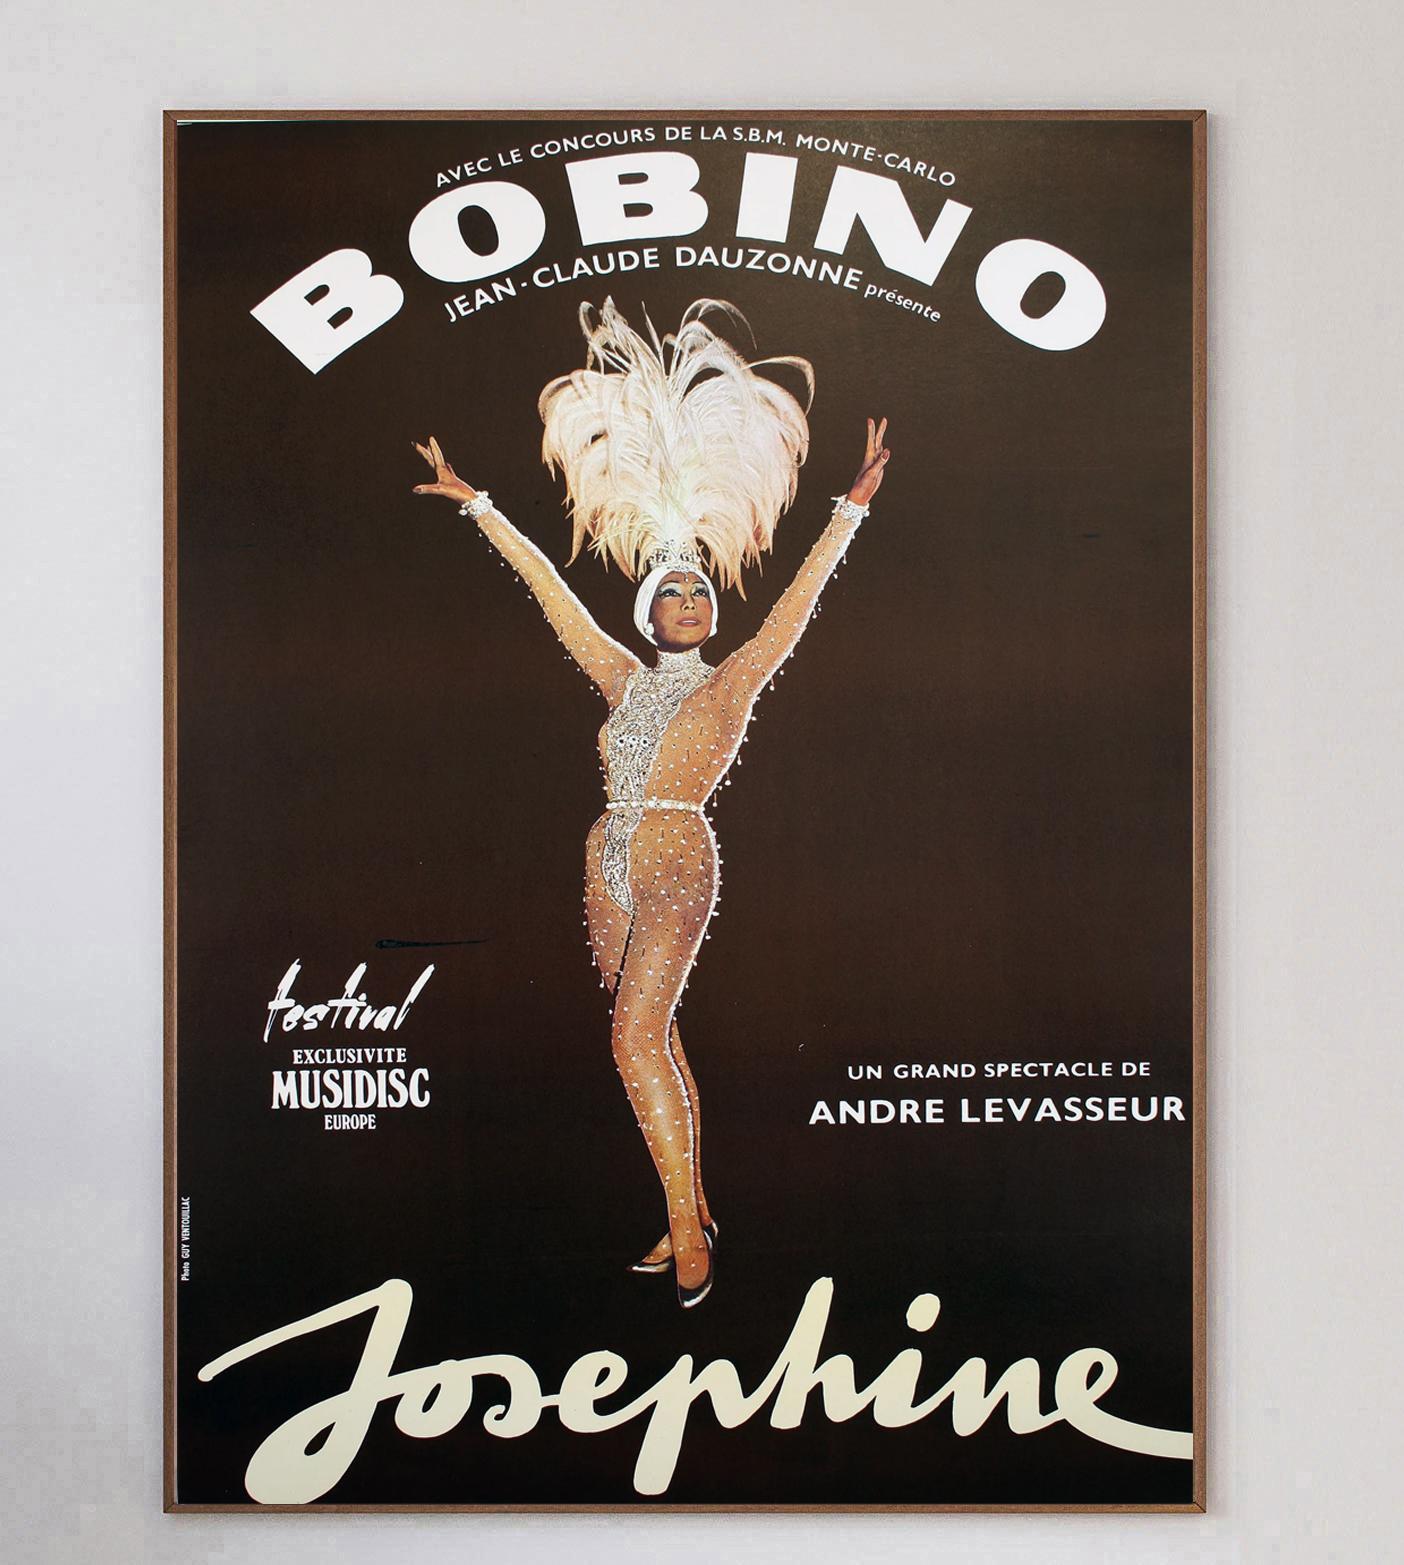 This beautiful rare poster was created to promote the great Josephine Baker's final ever show 